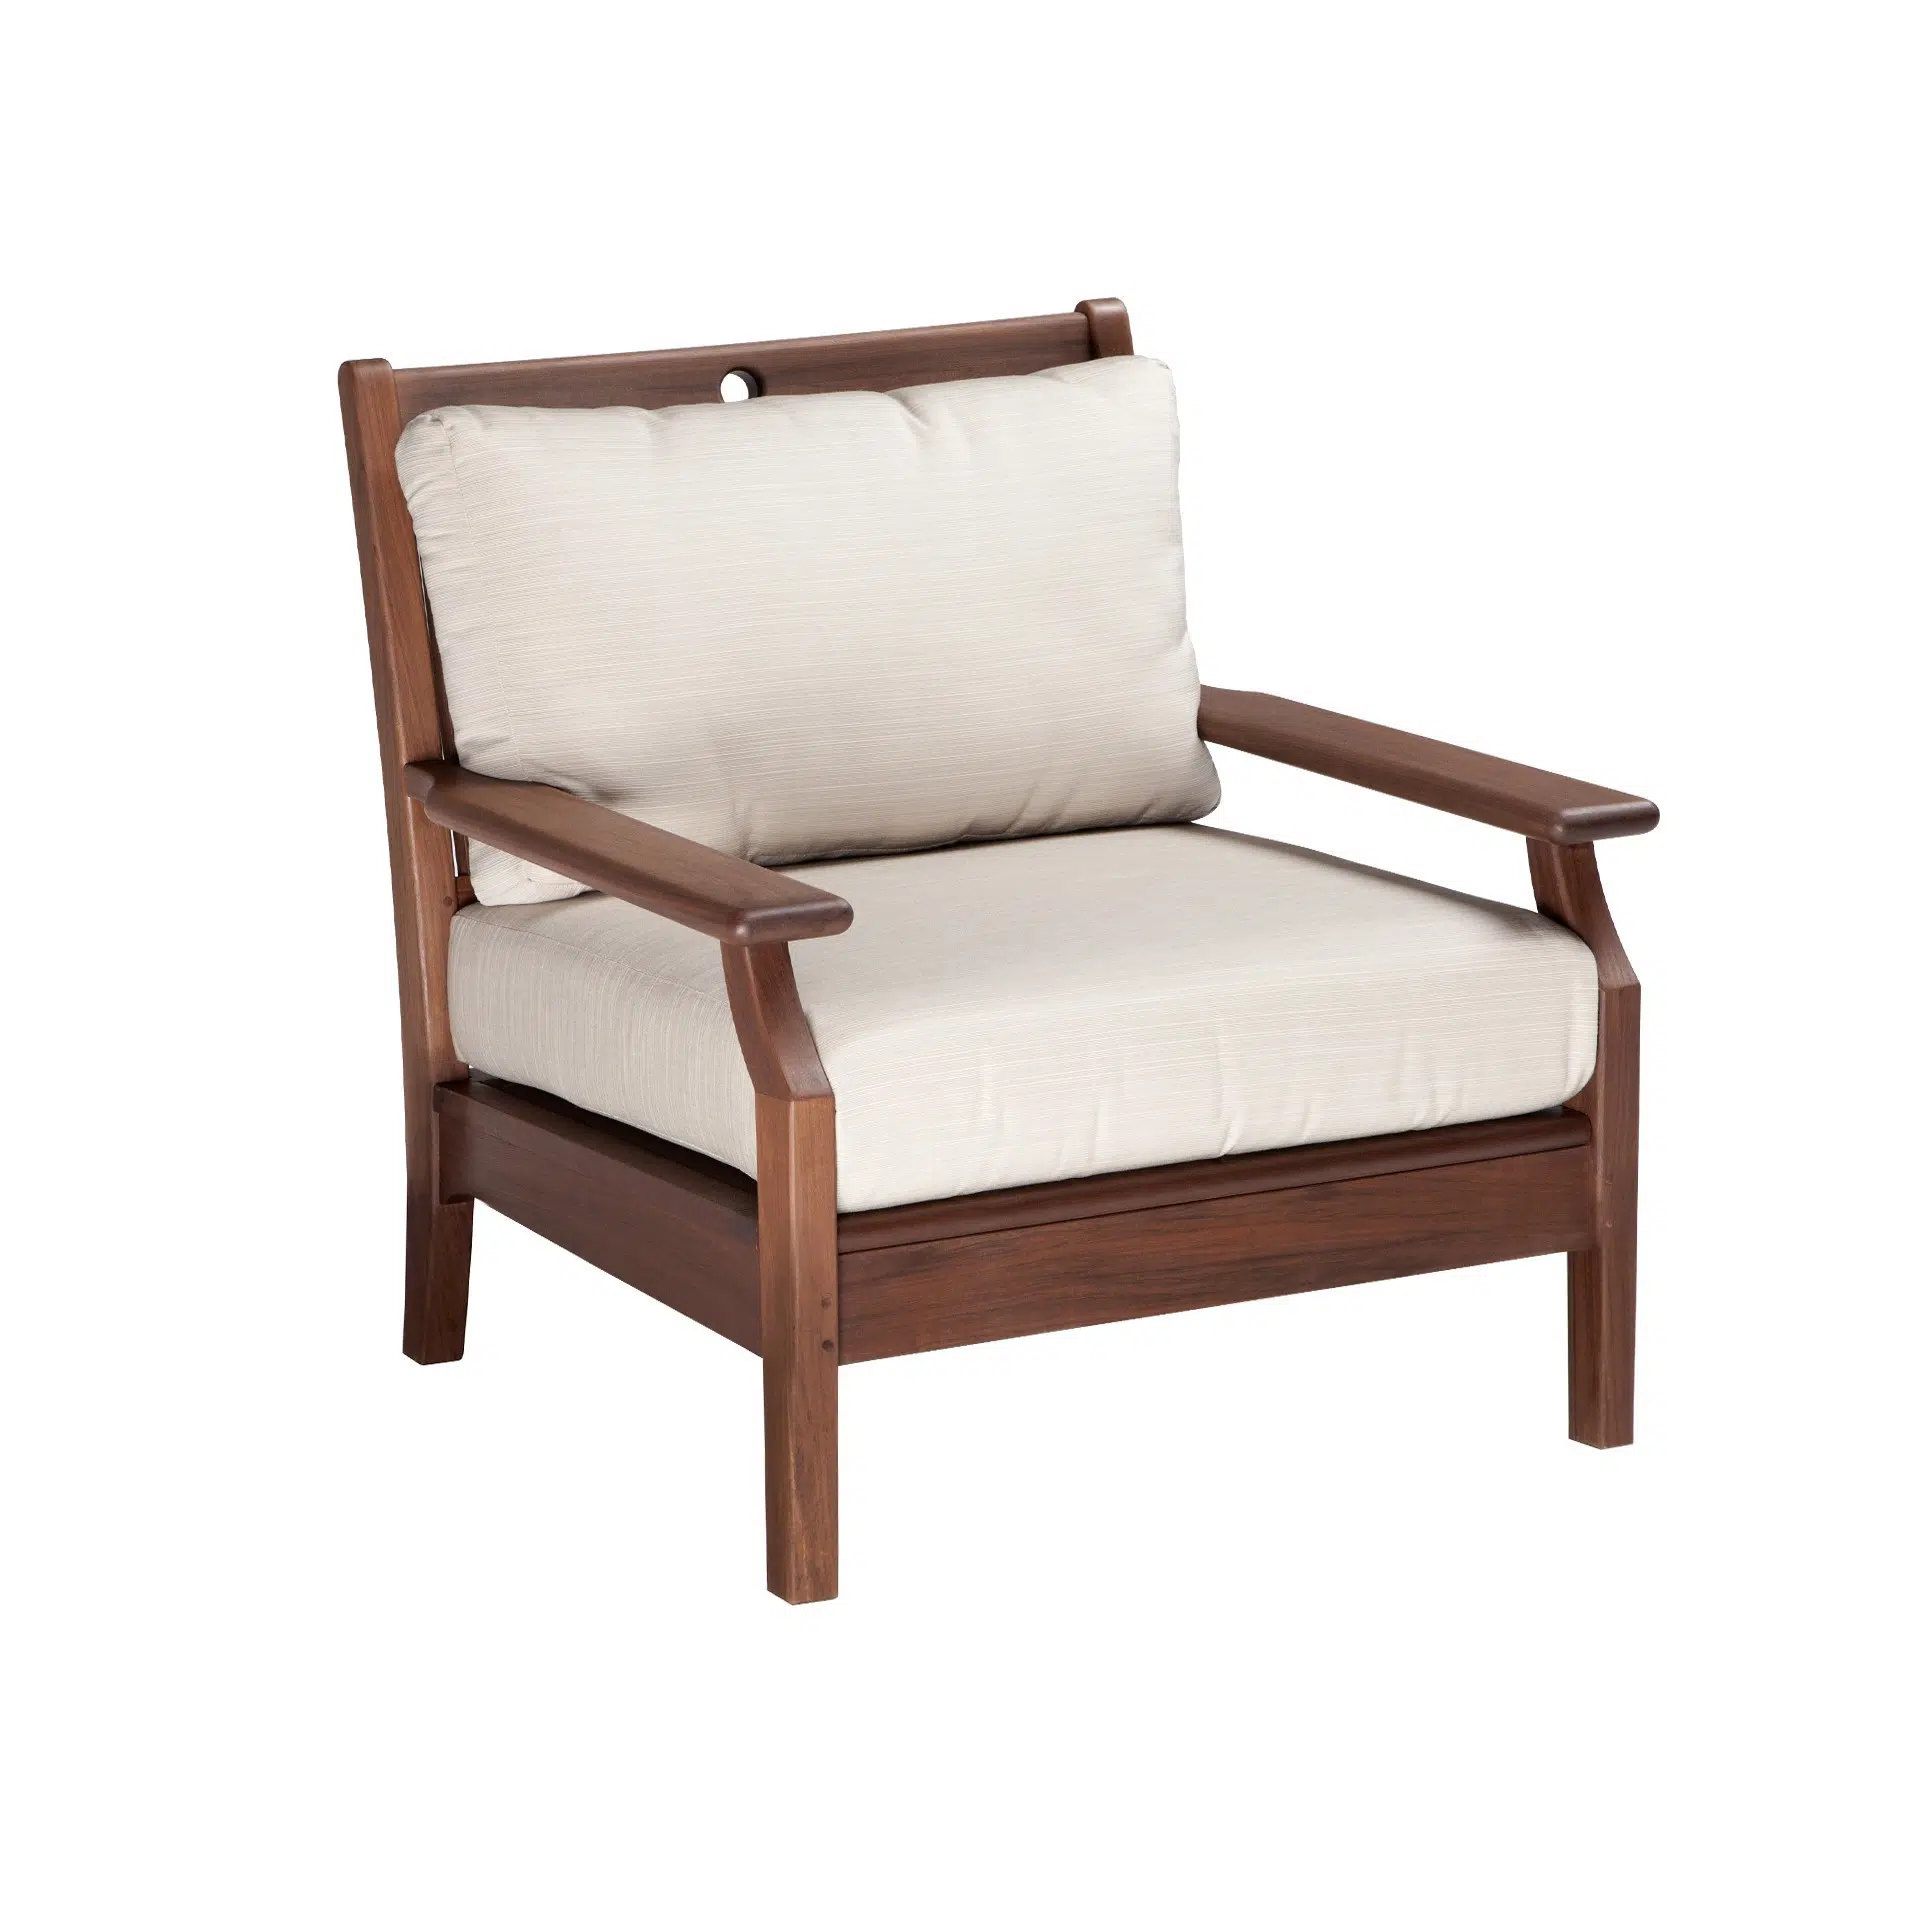 Opal loung chair from hausers patio luxury outdoor living by hausers patio luxury outdoor living by hausers patio